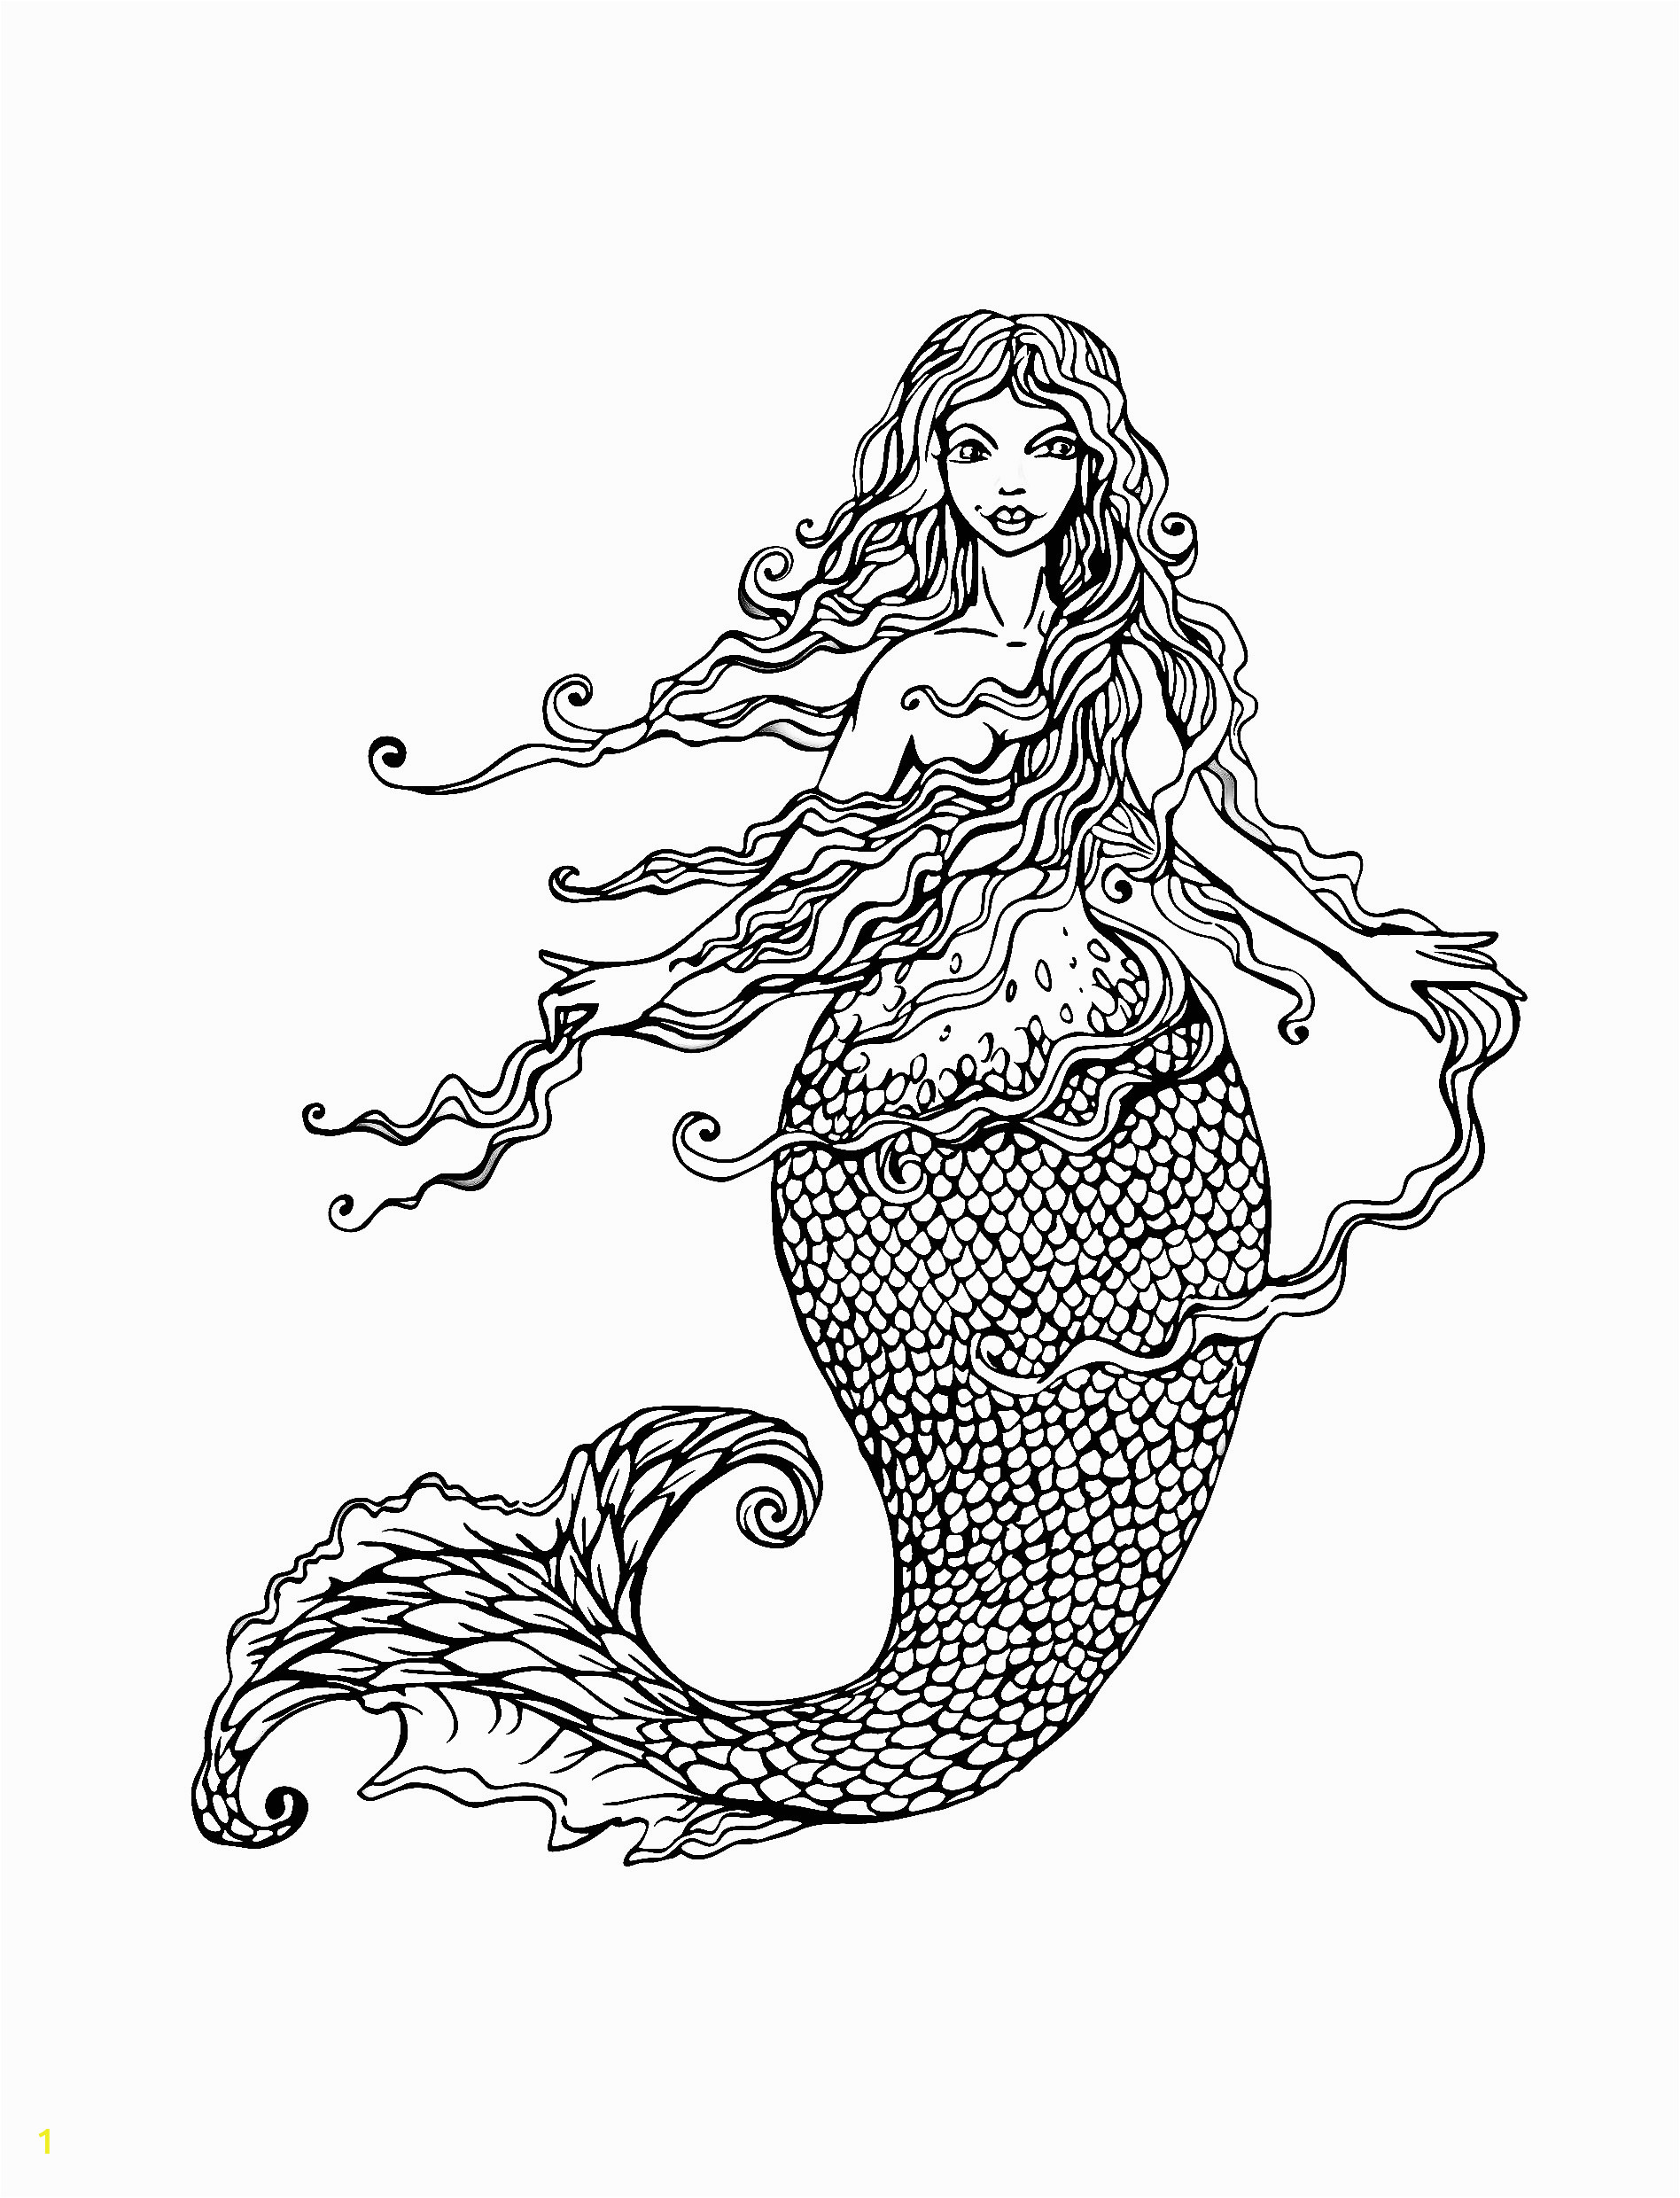 mermaid coloring pages for adults